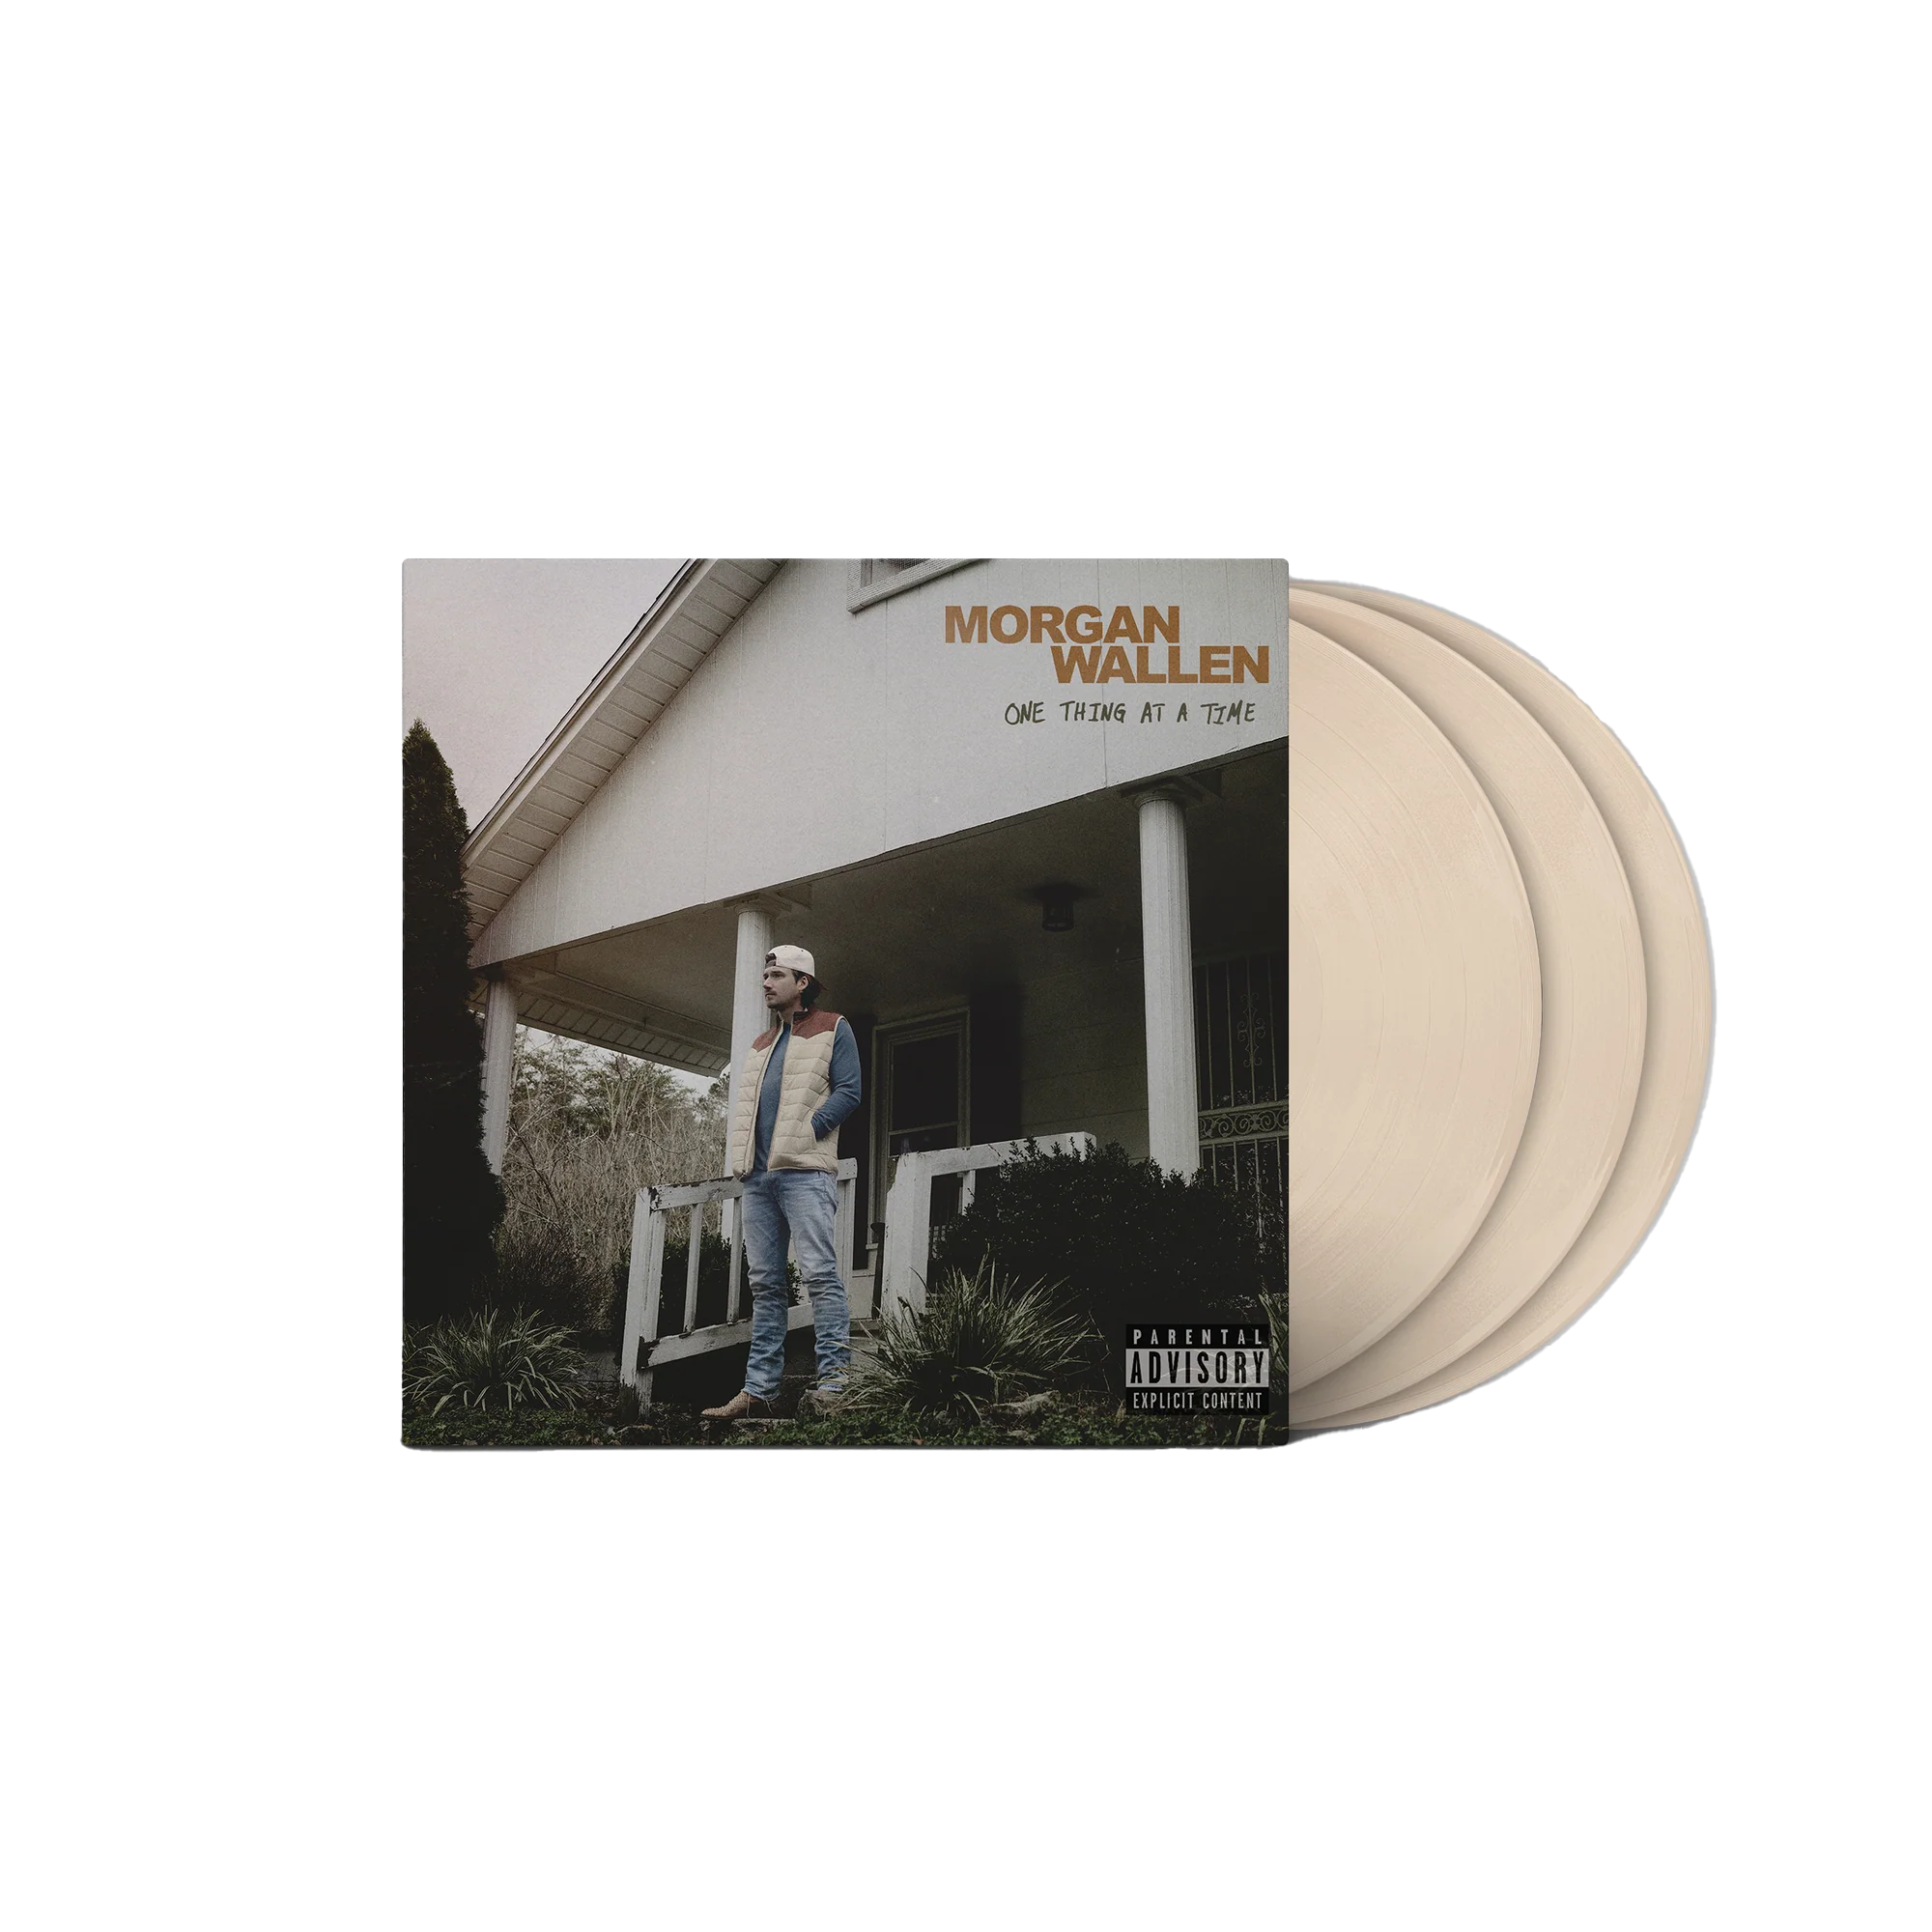 Morgan Wallen - One Thing At A Time: Vinyl 3LP